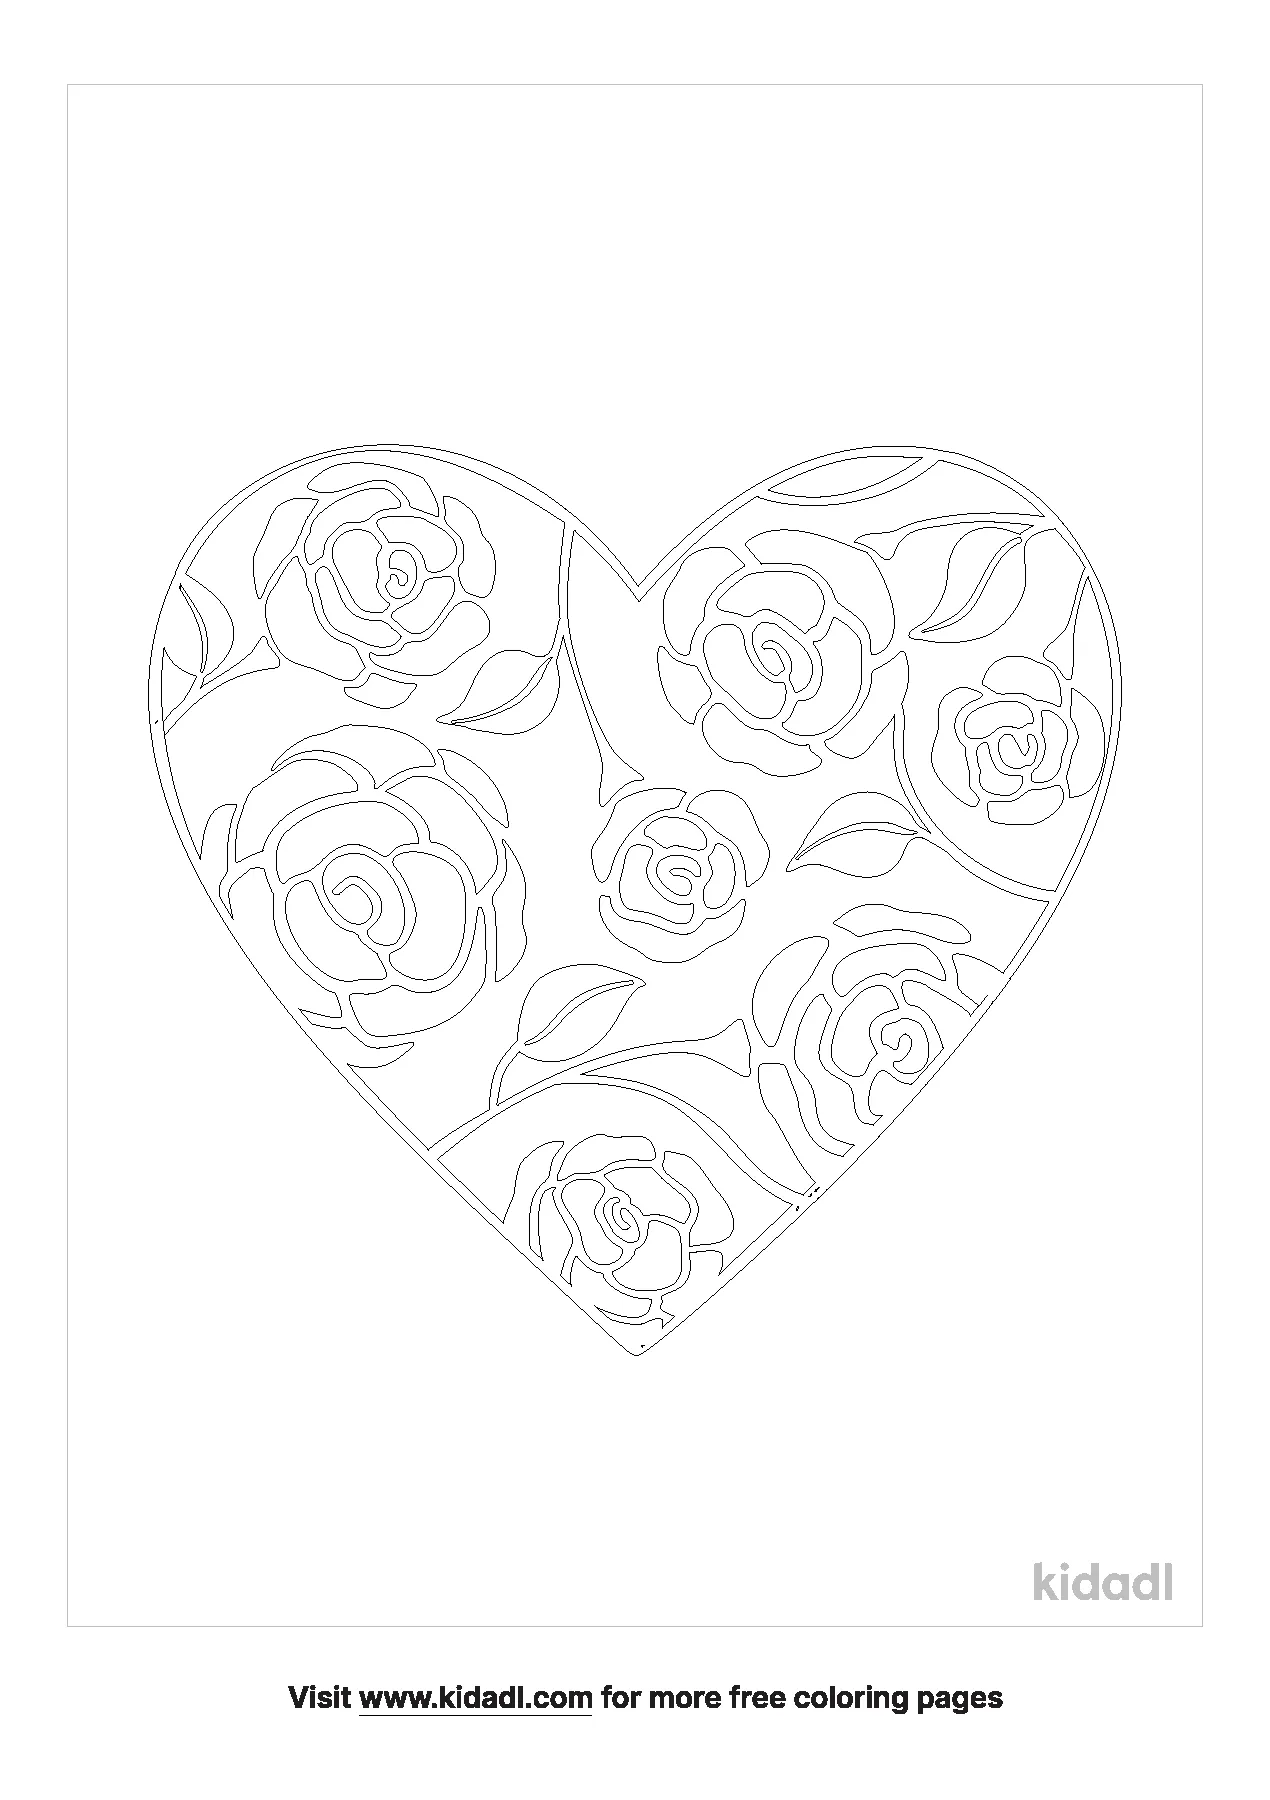 Easy Abstract Heart Coloring Page